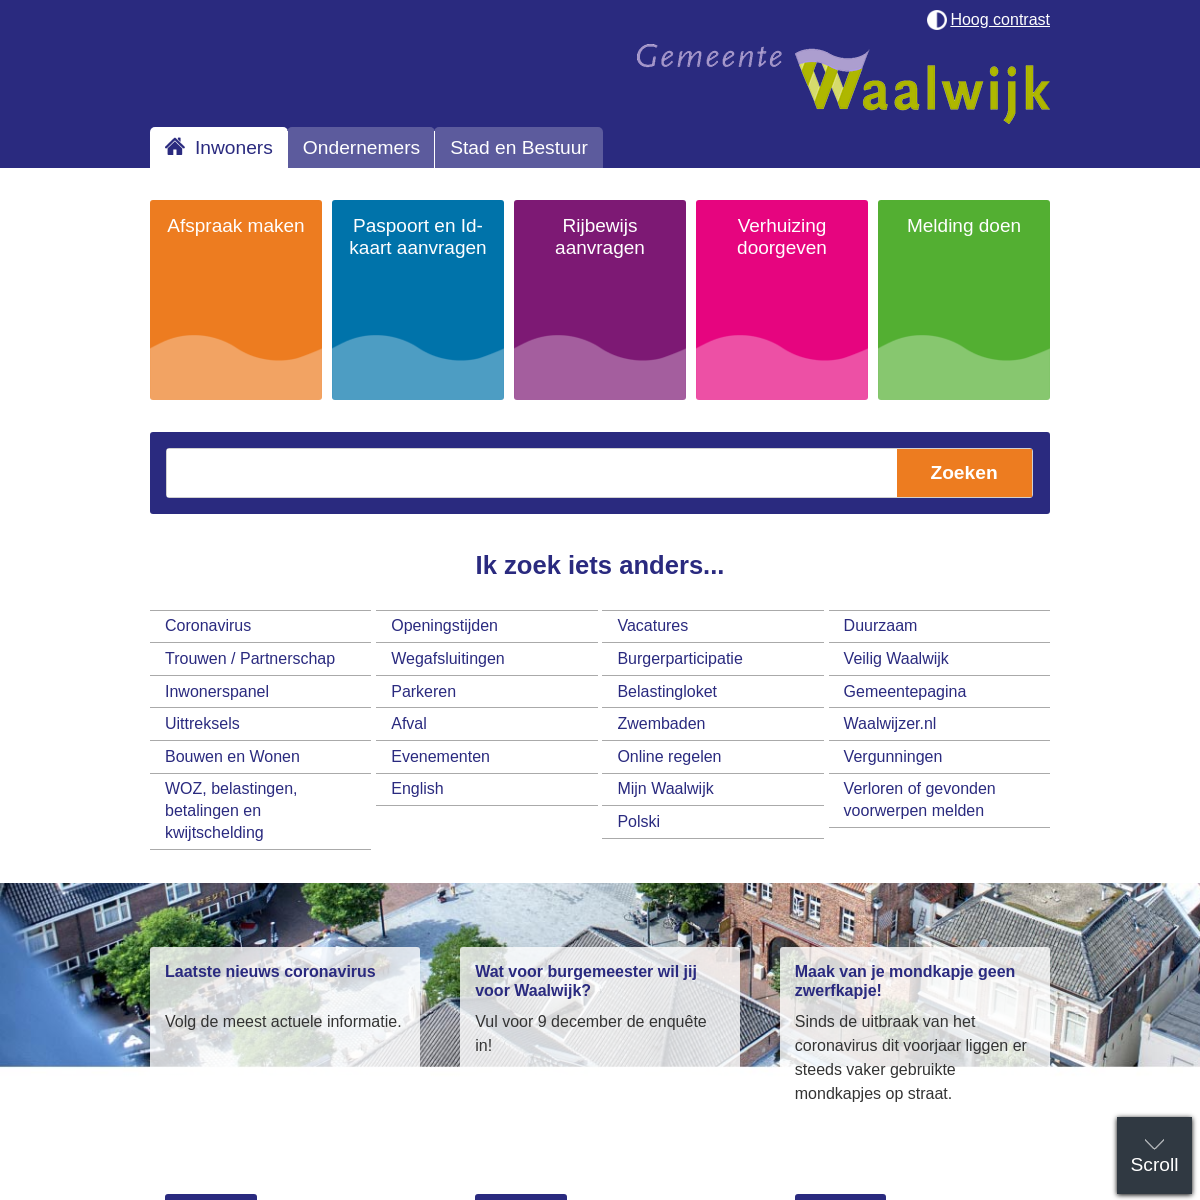 A complete backup of waalwijk.nl